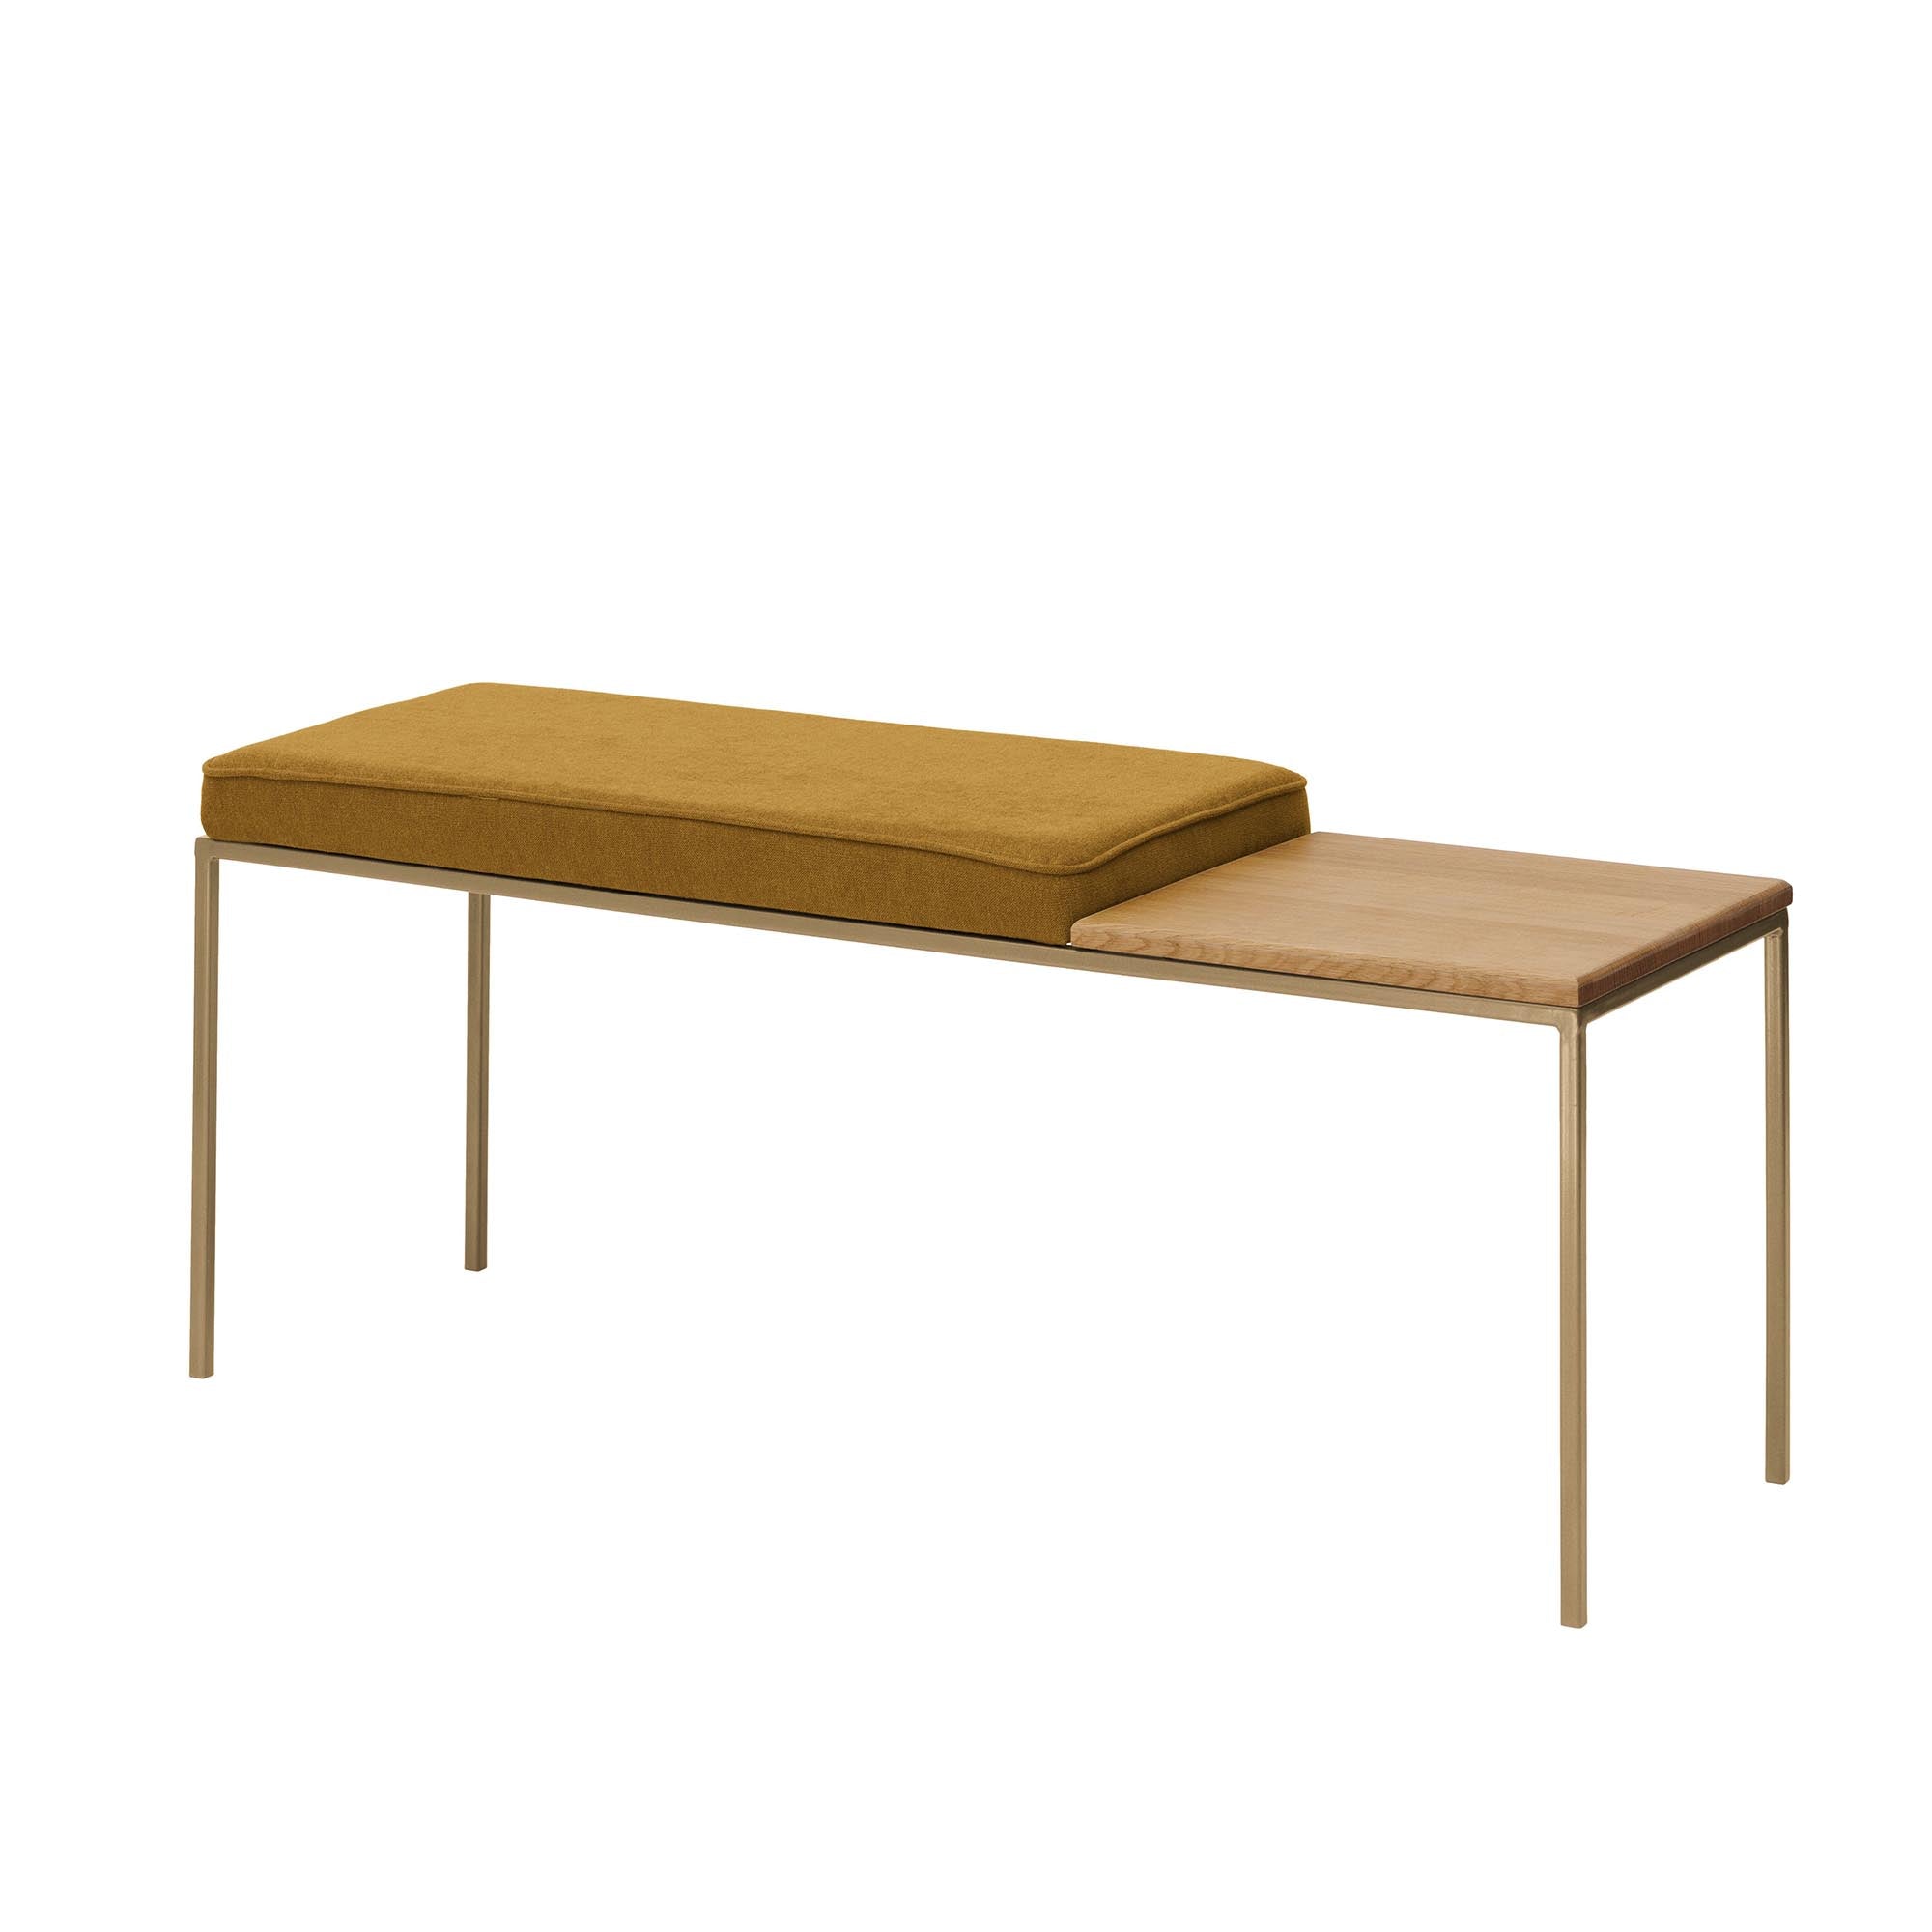 Oak Wood Seat, Natural Colour yellow fabric, yellow frame, half-side view